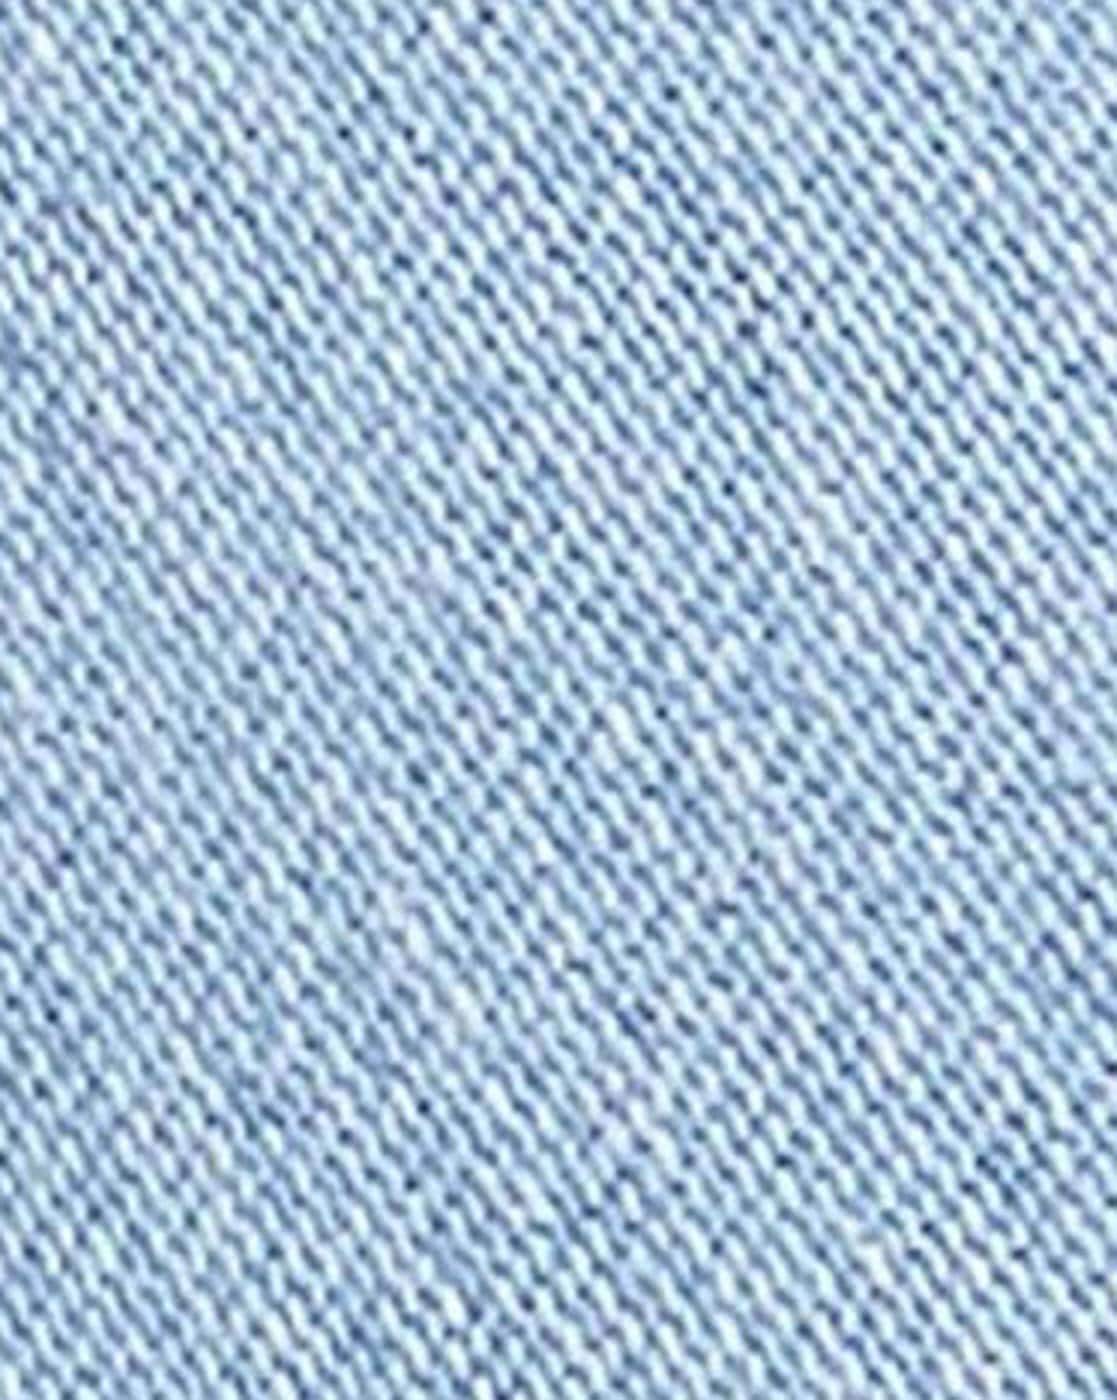 Denim Jeans Texture Or Denim Jeans Background With Seam Of Fashion Jeans -  Stock Image - Everypixel